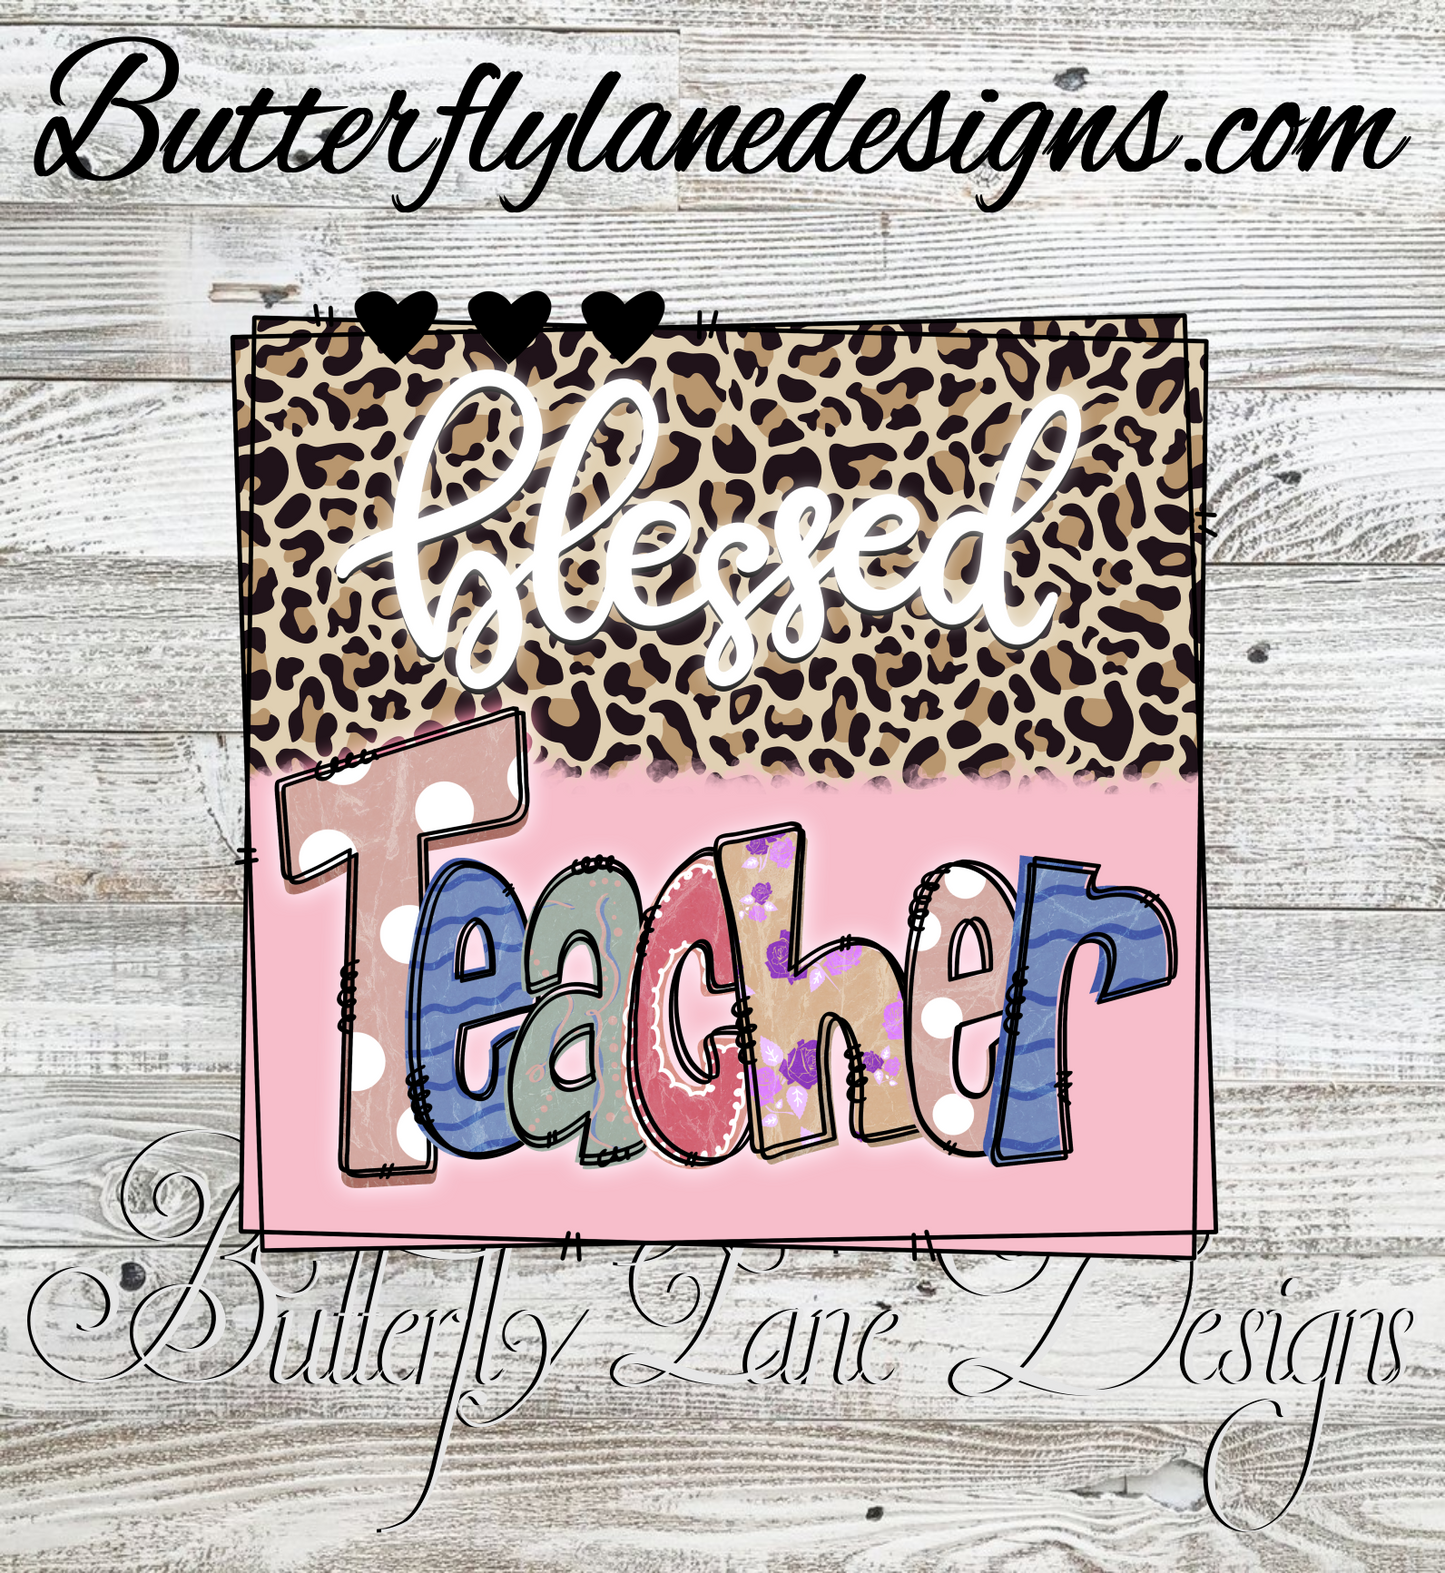 Blessed teacher :: Clear Decal or VCD